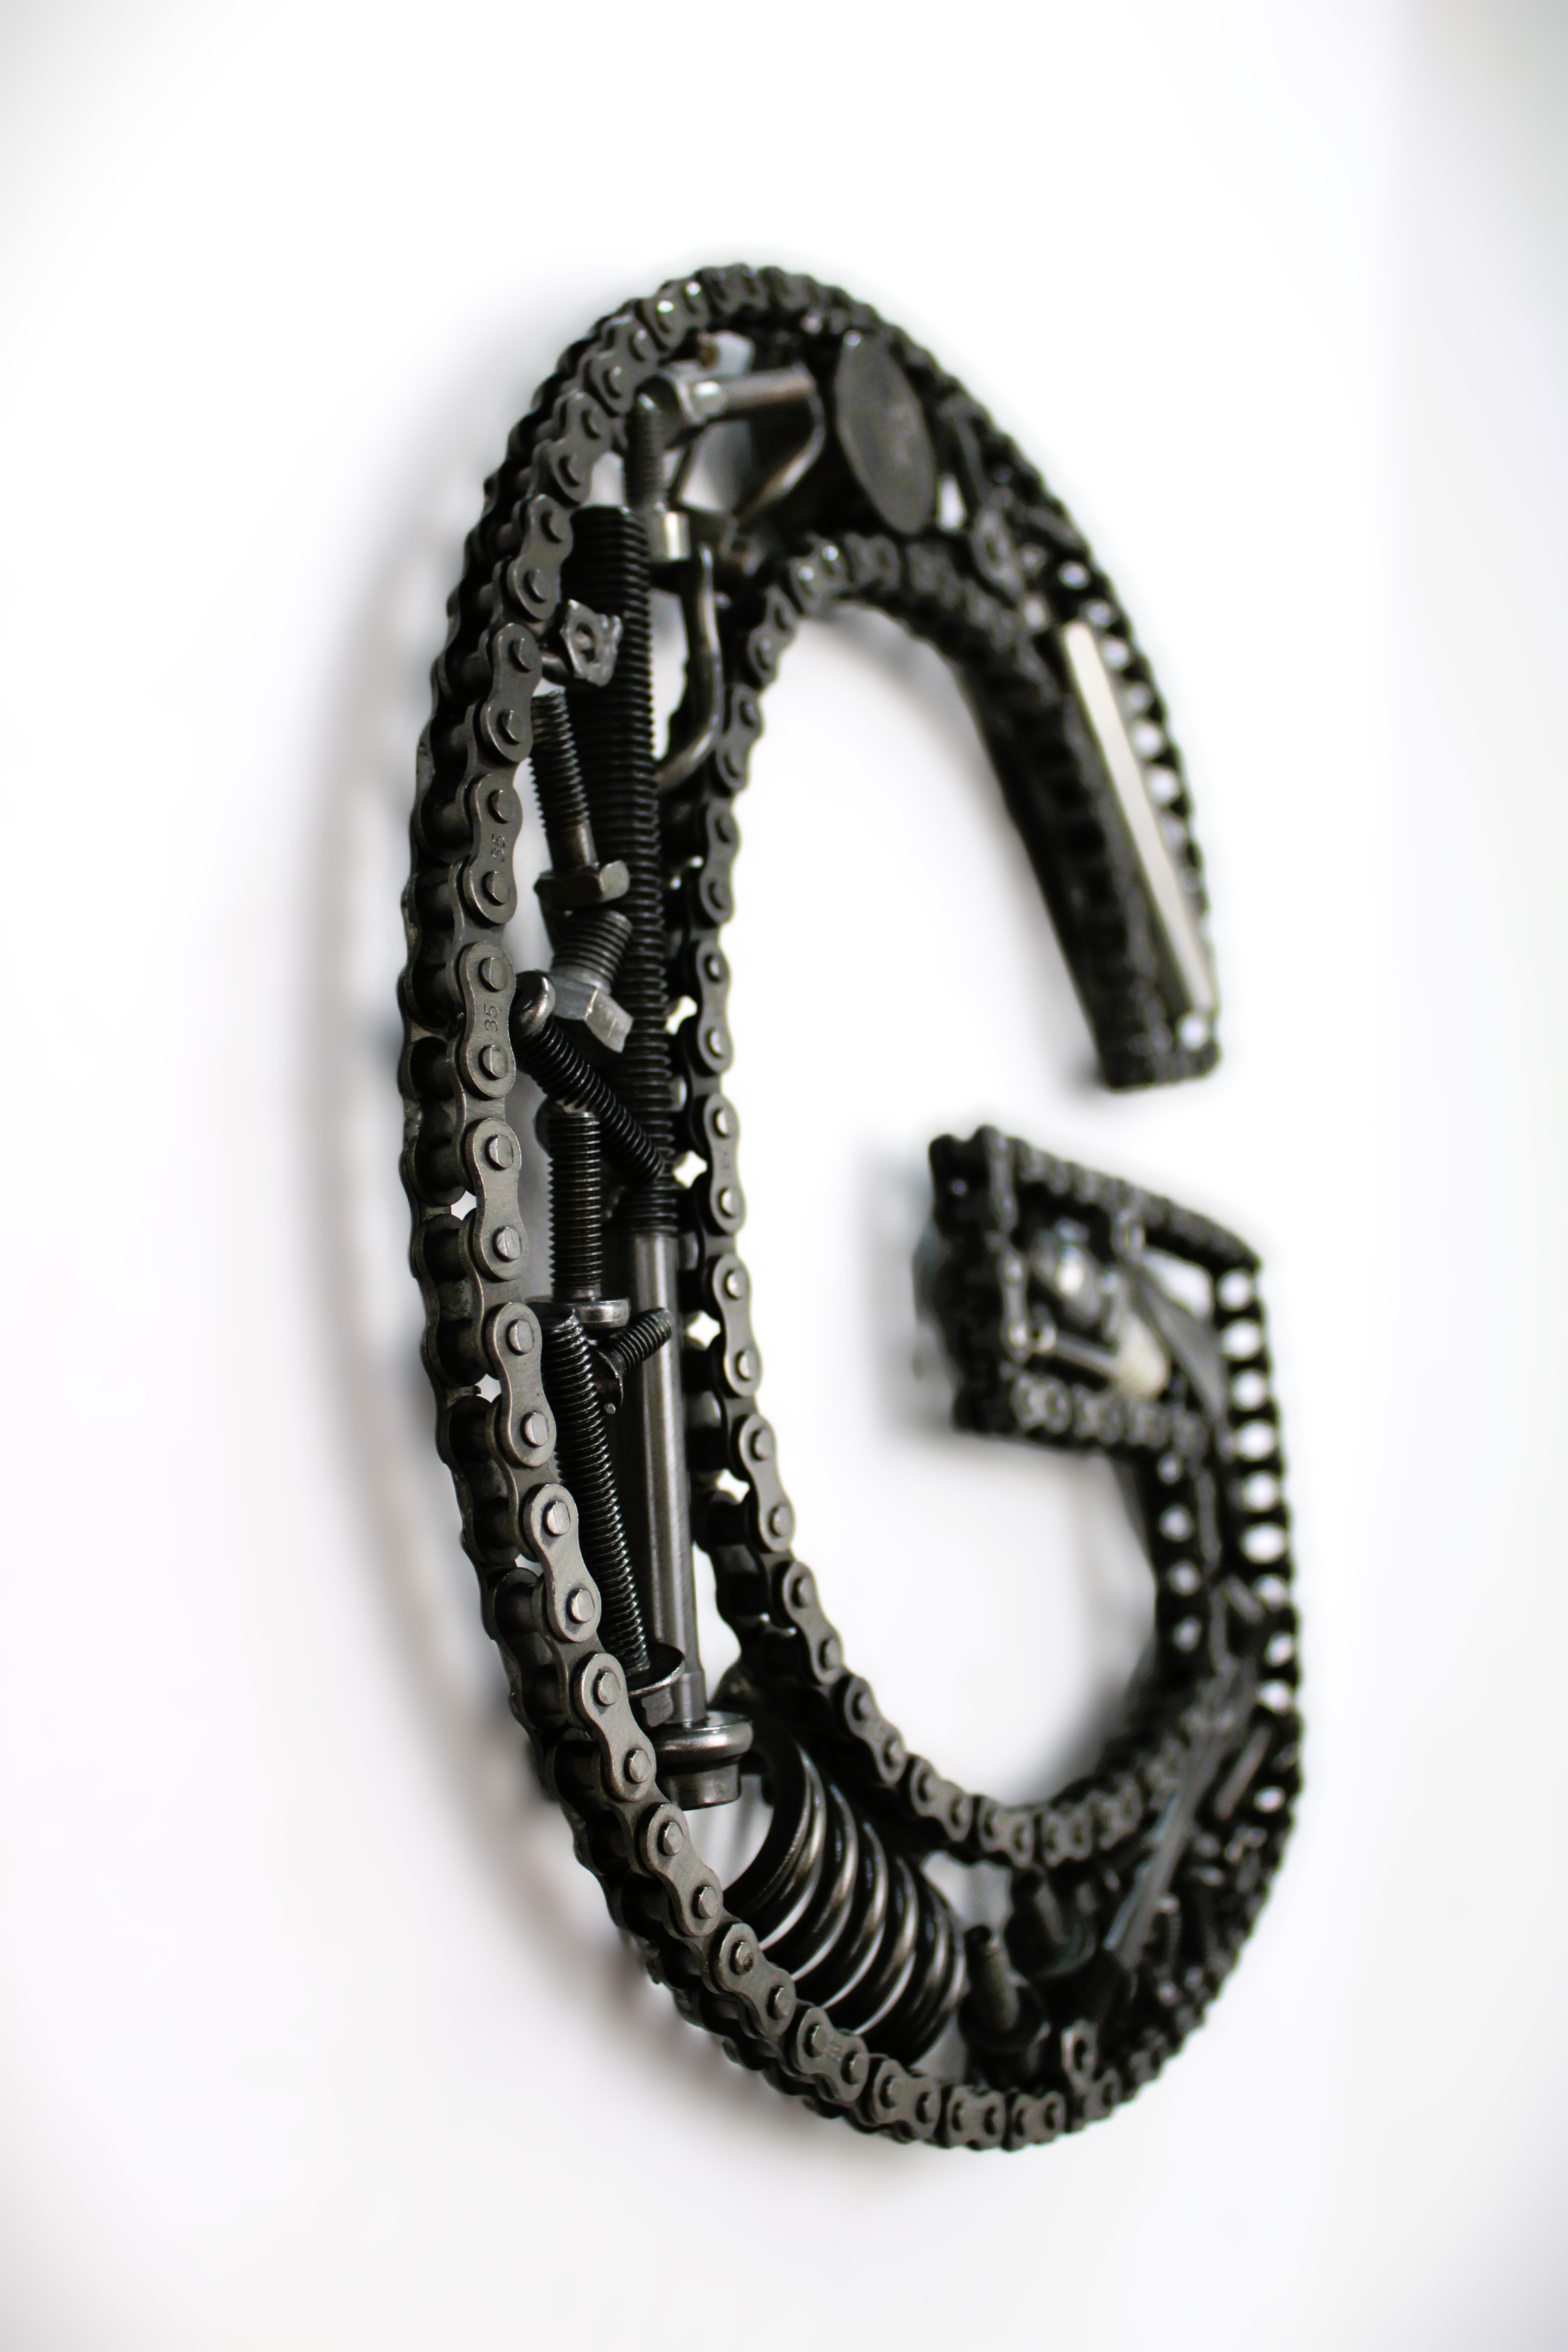 A letter G made out of real car parts, outlined with a timing chain.